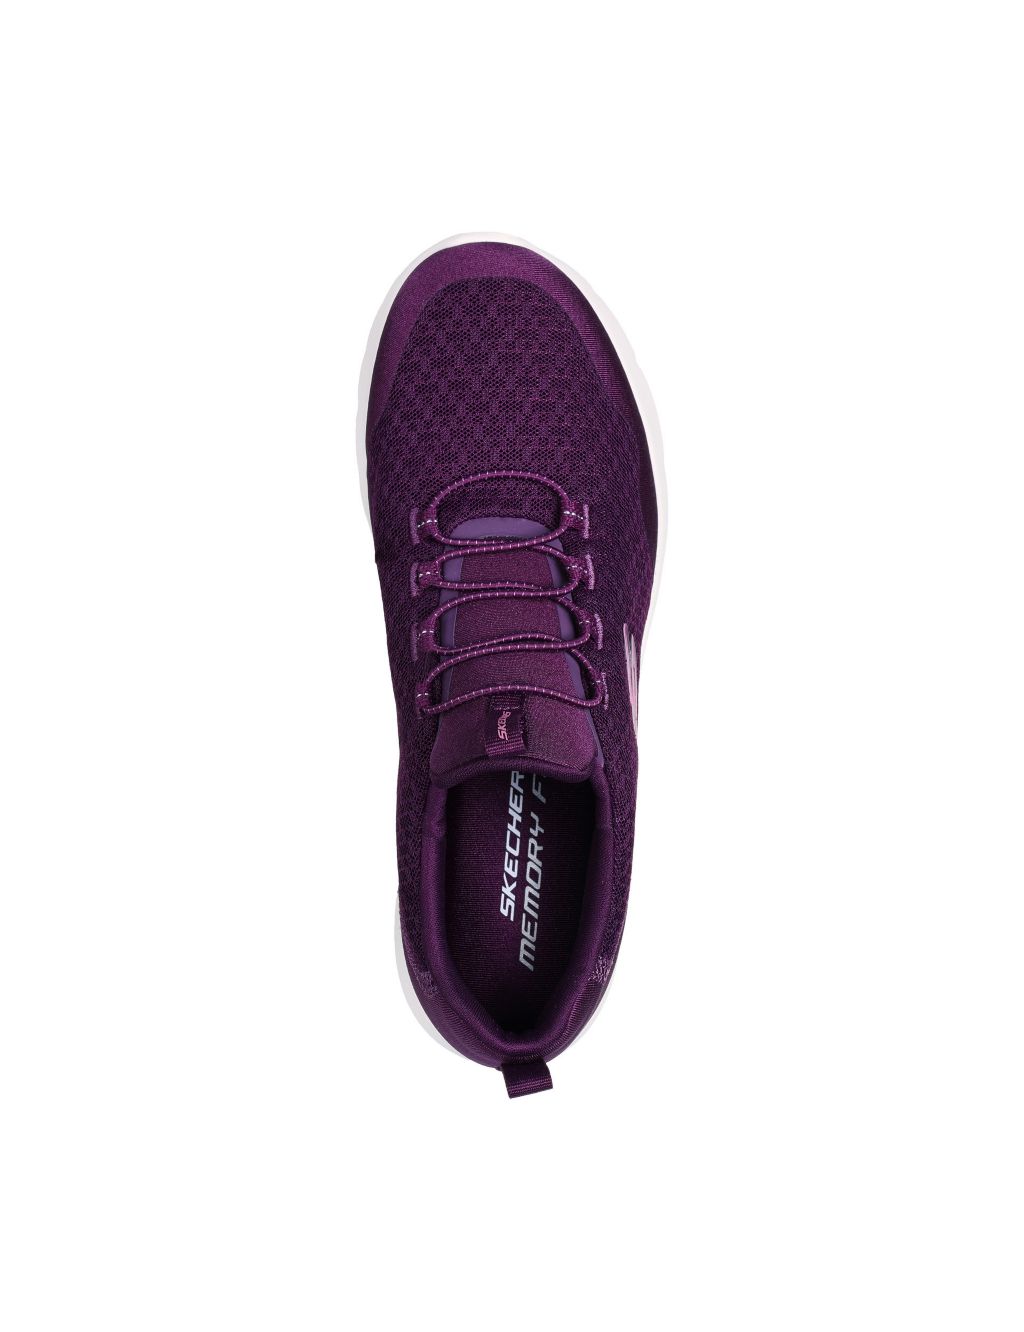 Dynamight 2.0 Real Smooth Slip On Trainers image 3